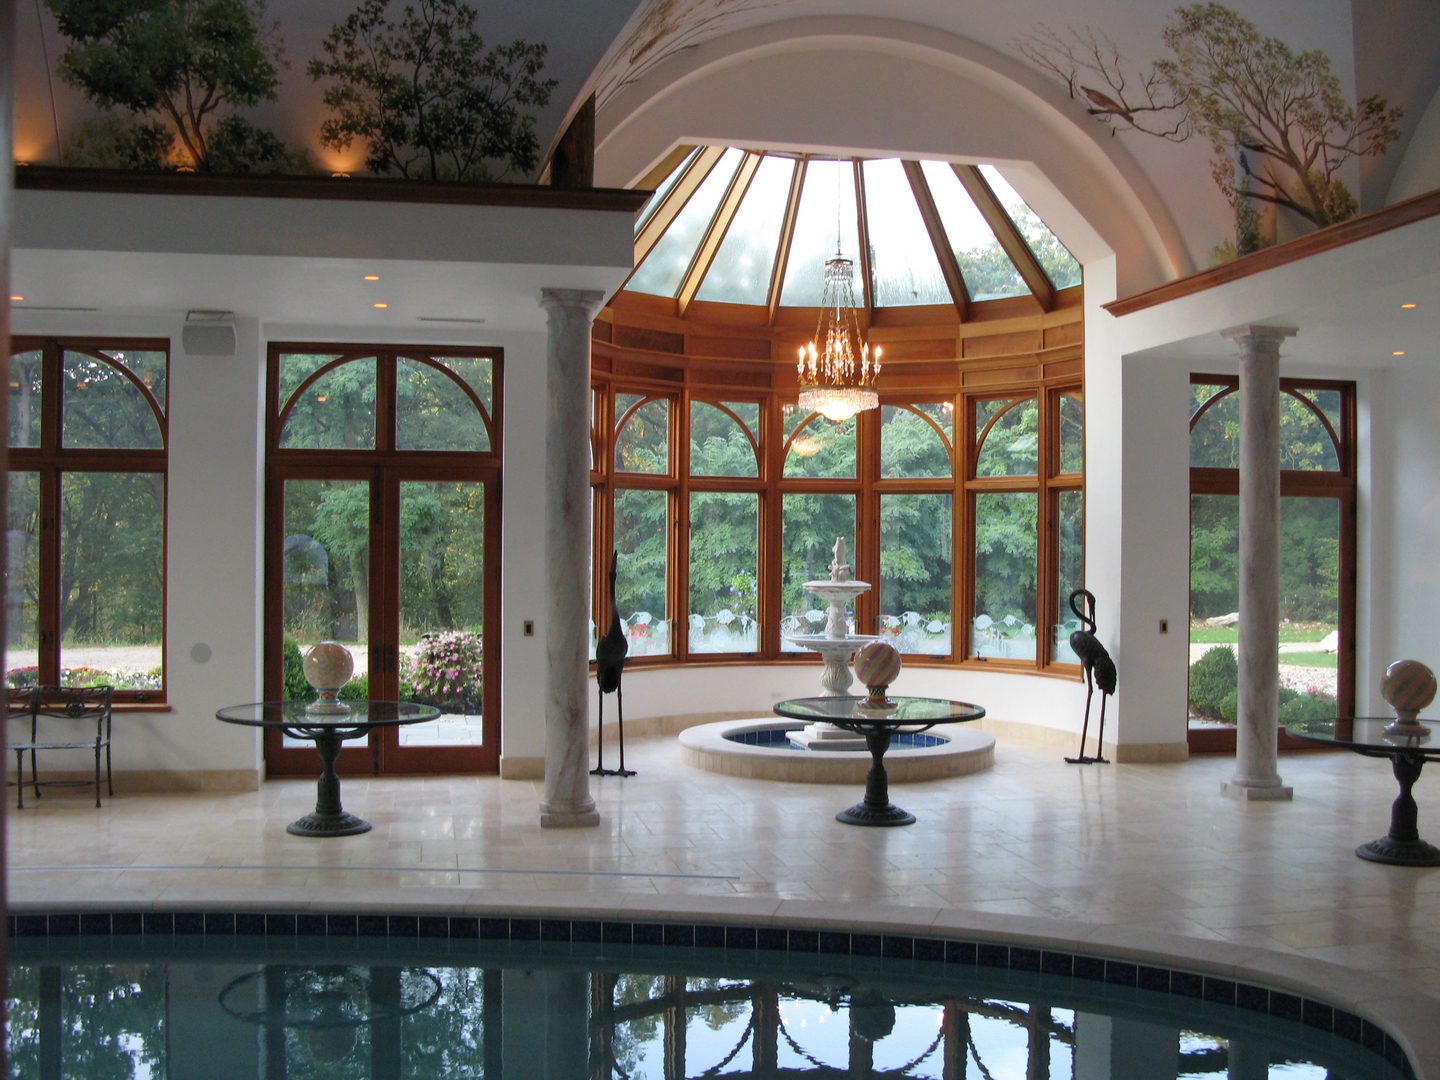 A large indoor pool with a fountain and chandelier.